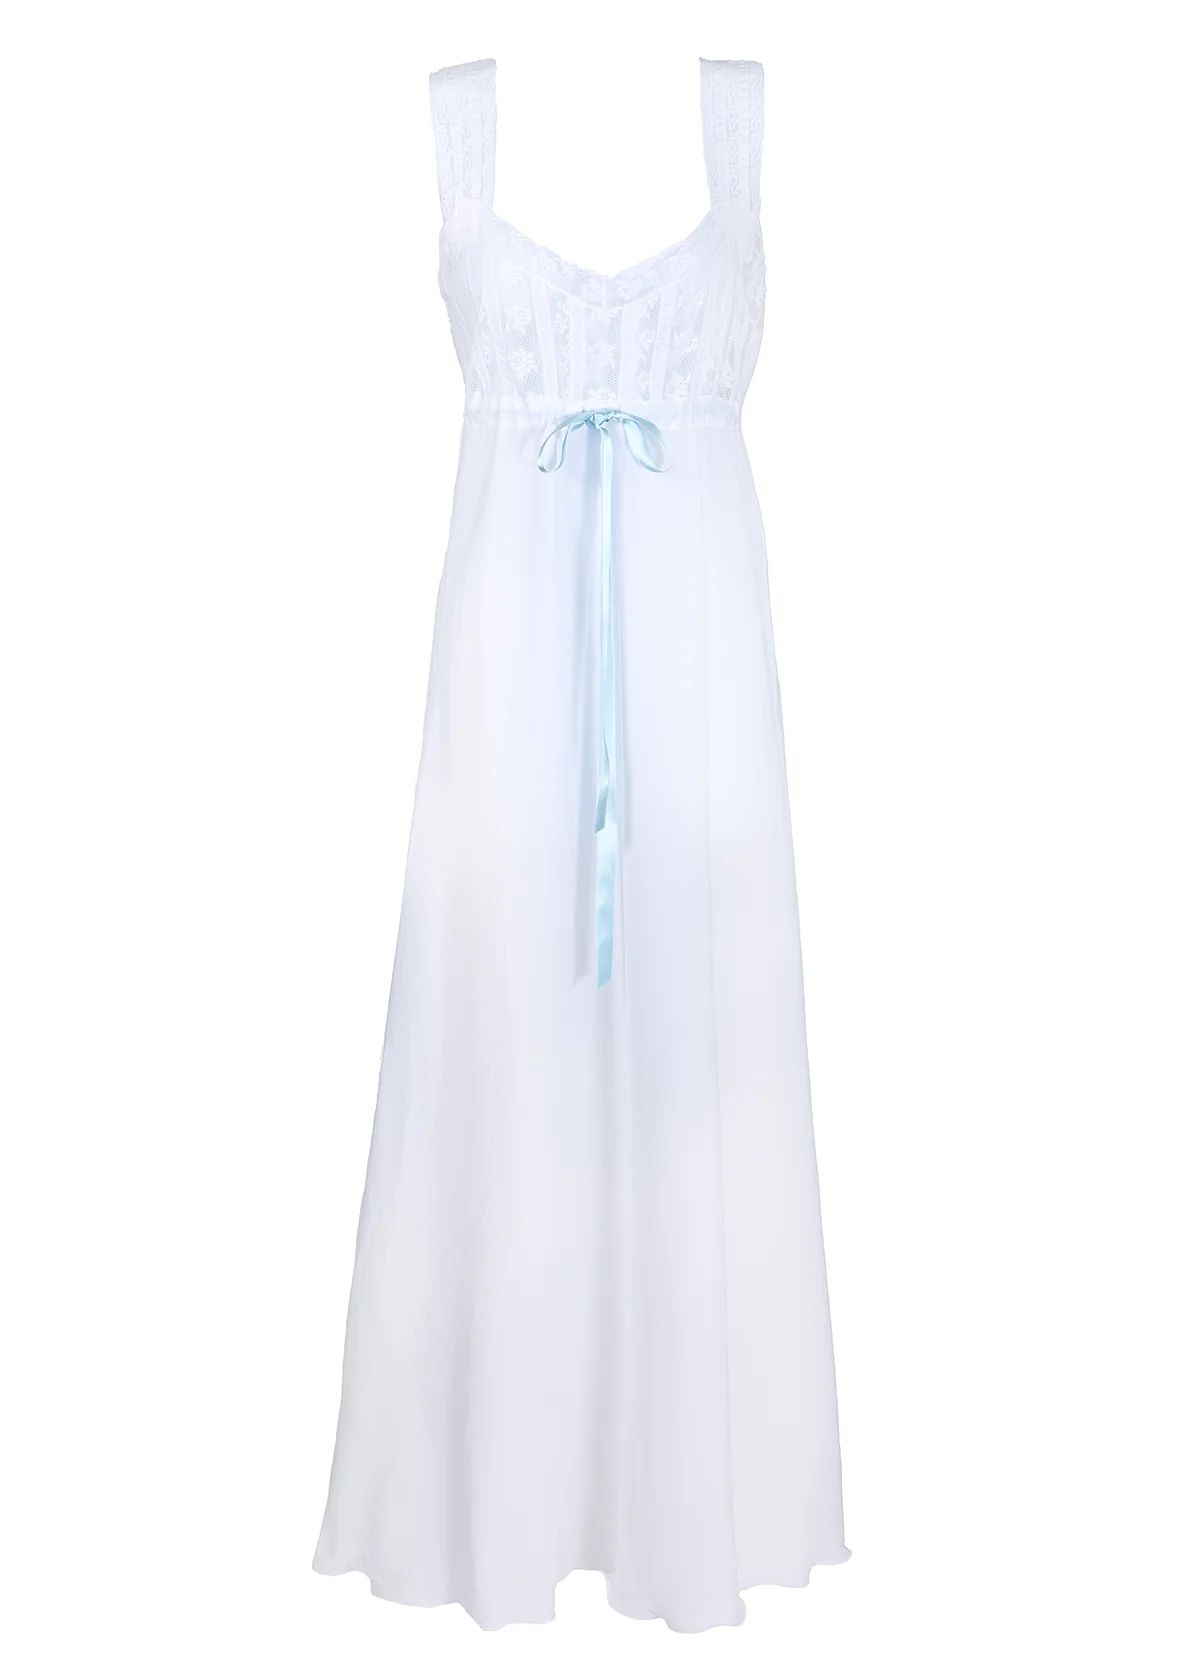 Hoara Cotton Nightgown | Over The Moon